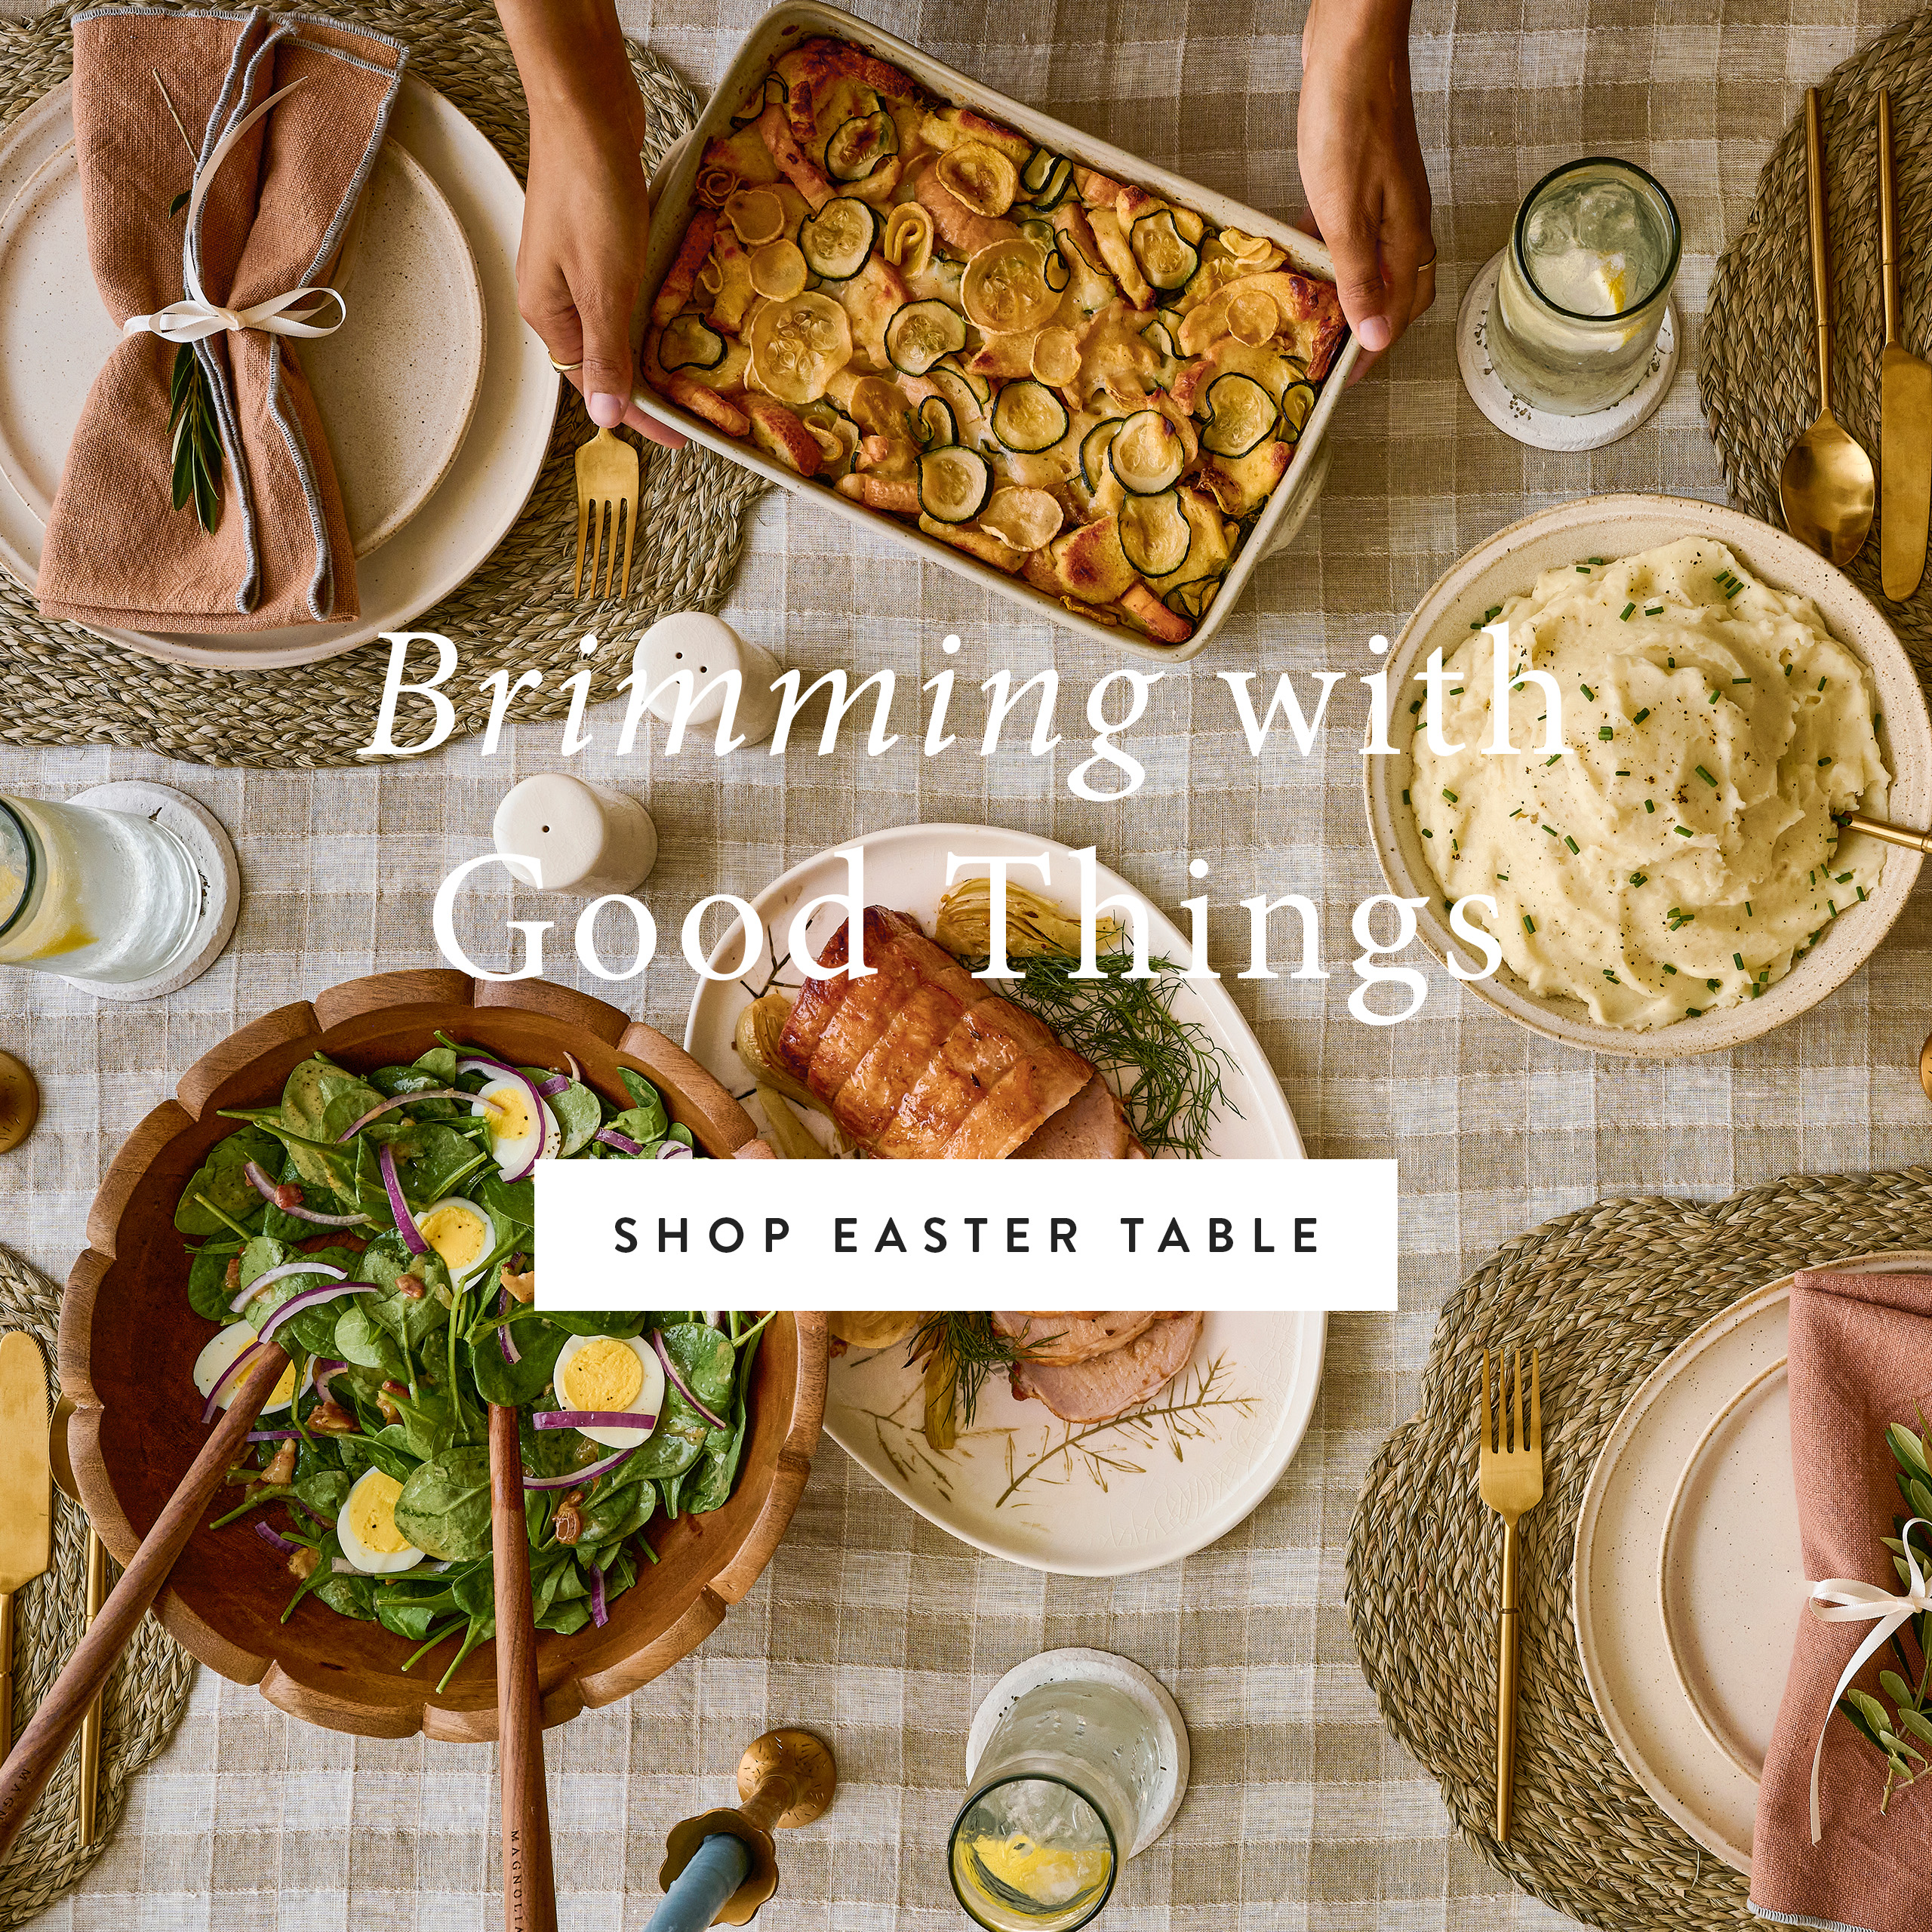 brimming with good things - shop easter table - a table set with multiple dishes from a birds eye view